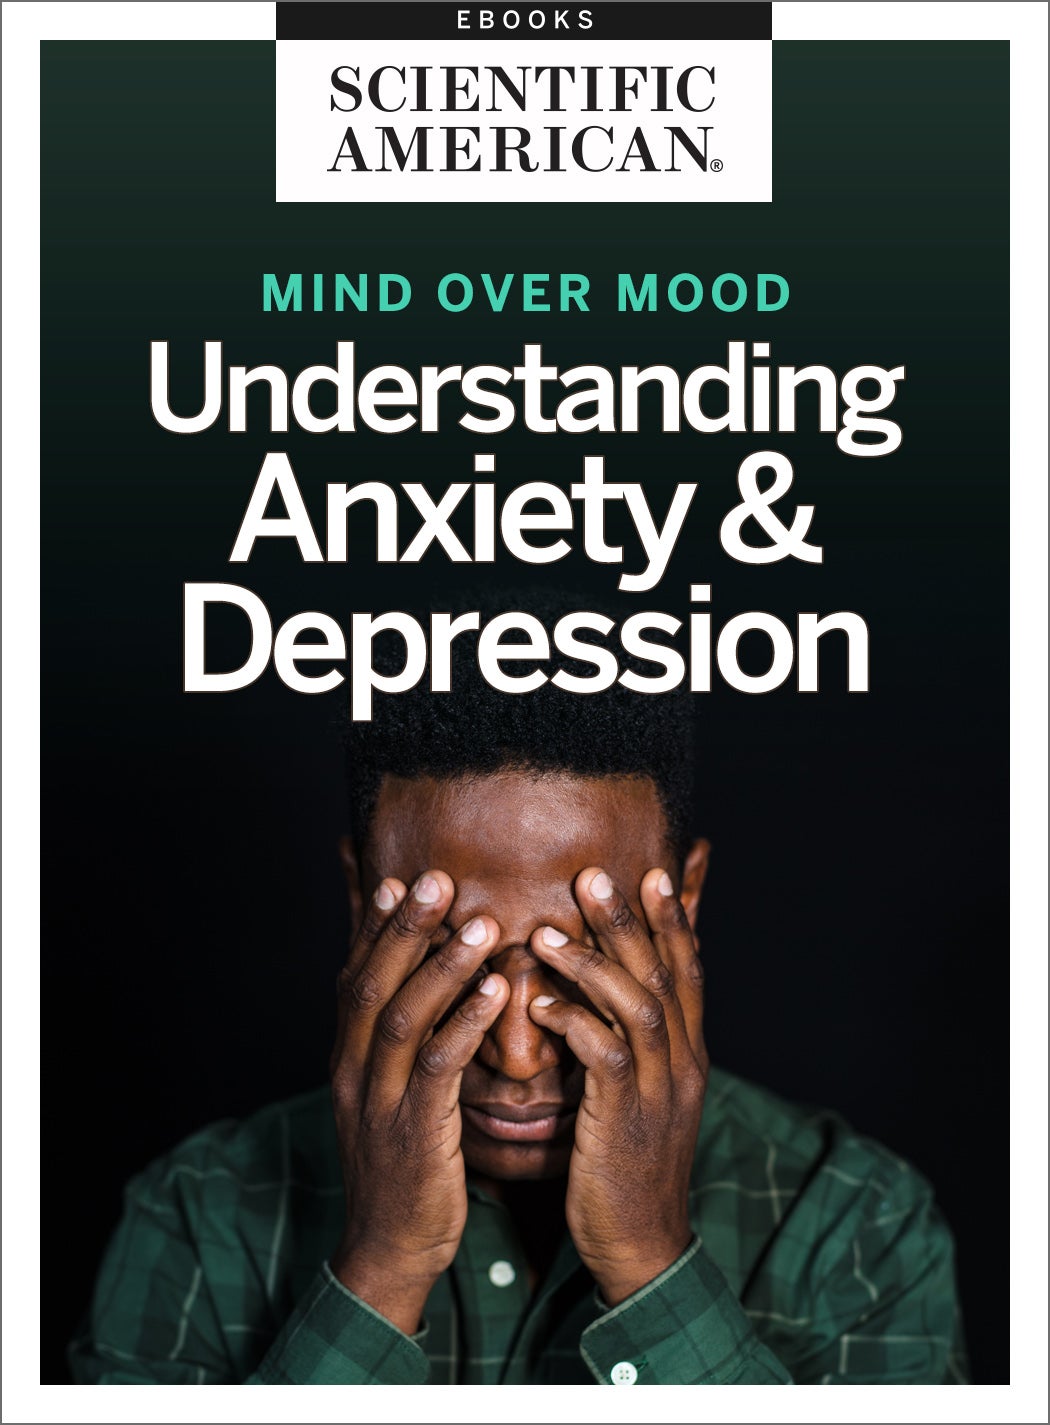 Mind Over Mood: Understanding Anxiety & Depression